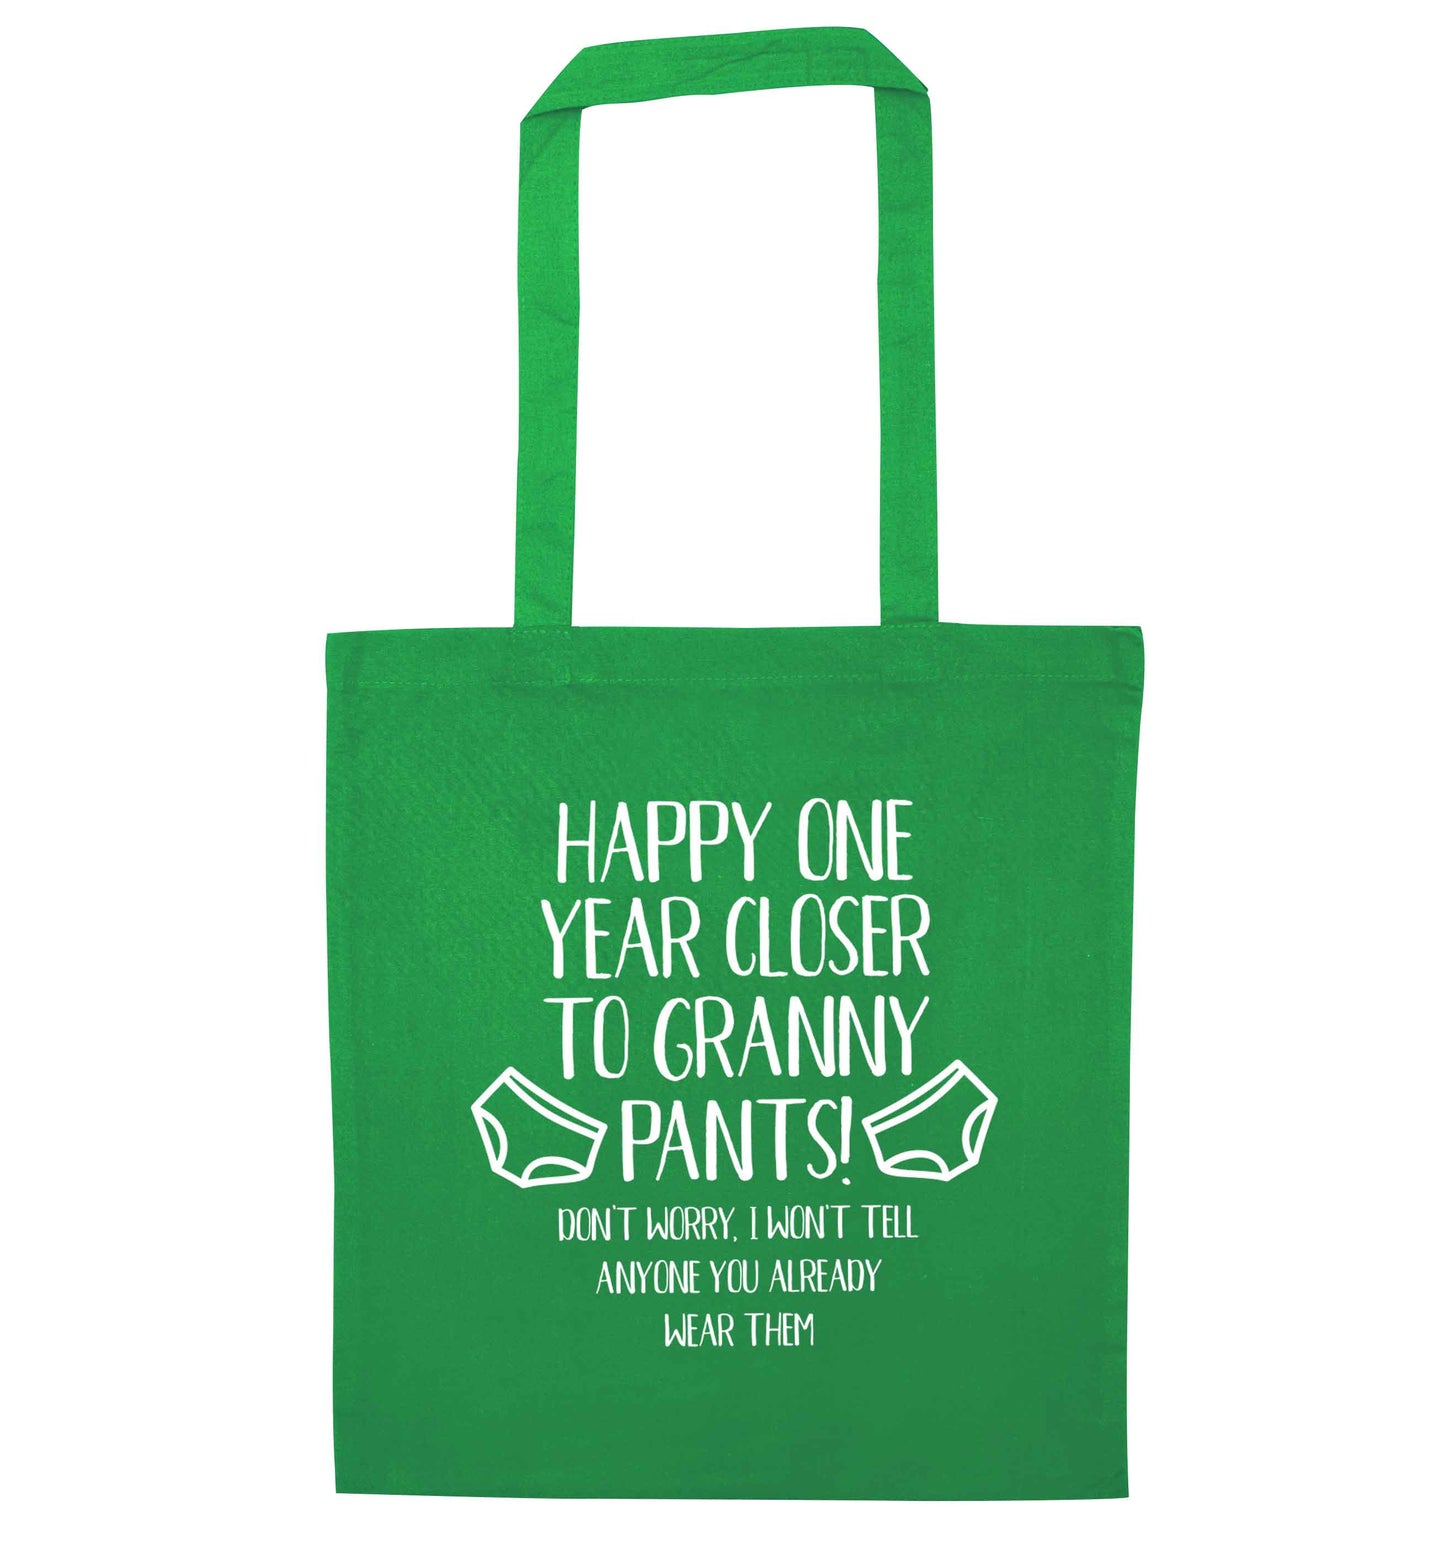 Happy one year closer to granny pants green tote bag